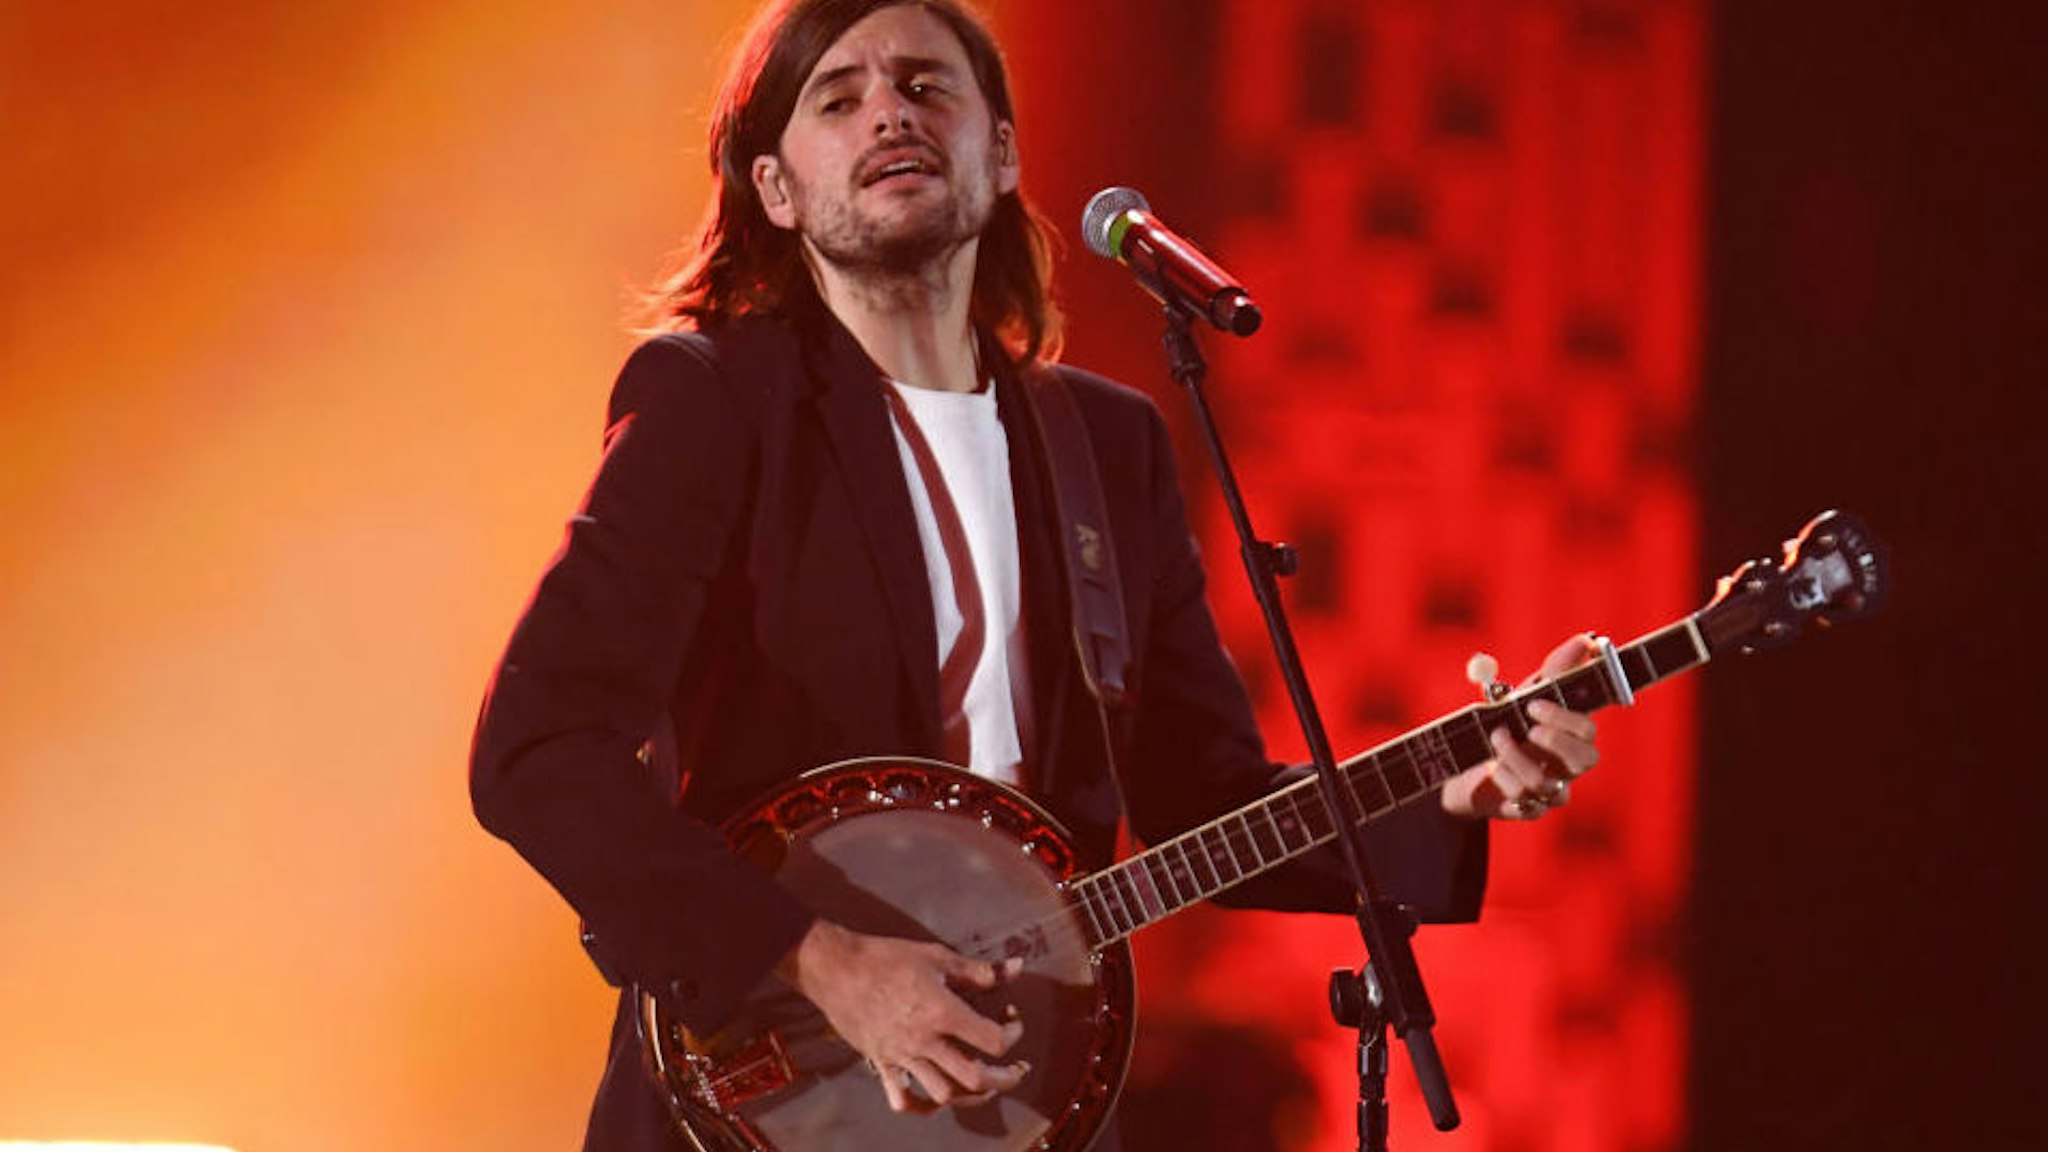 Winston Marshall of Mumford & Sons performs onstage during the 2019 iHeartRadio Music Festival at T-Mobile Arena on September 21, 2019 in Las Vegas, Nevada.